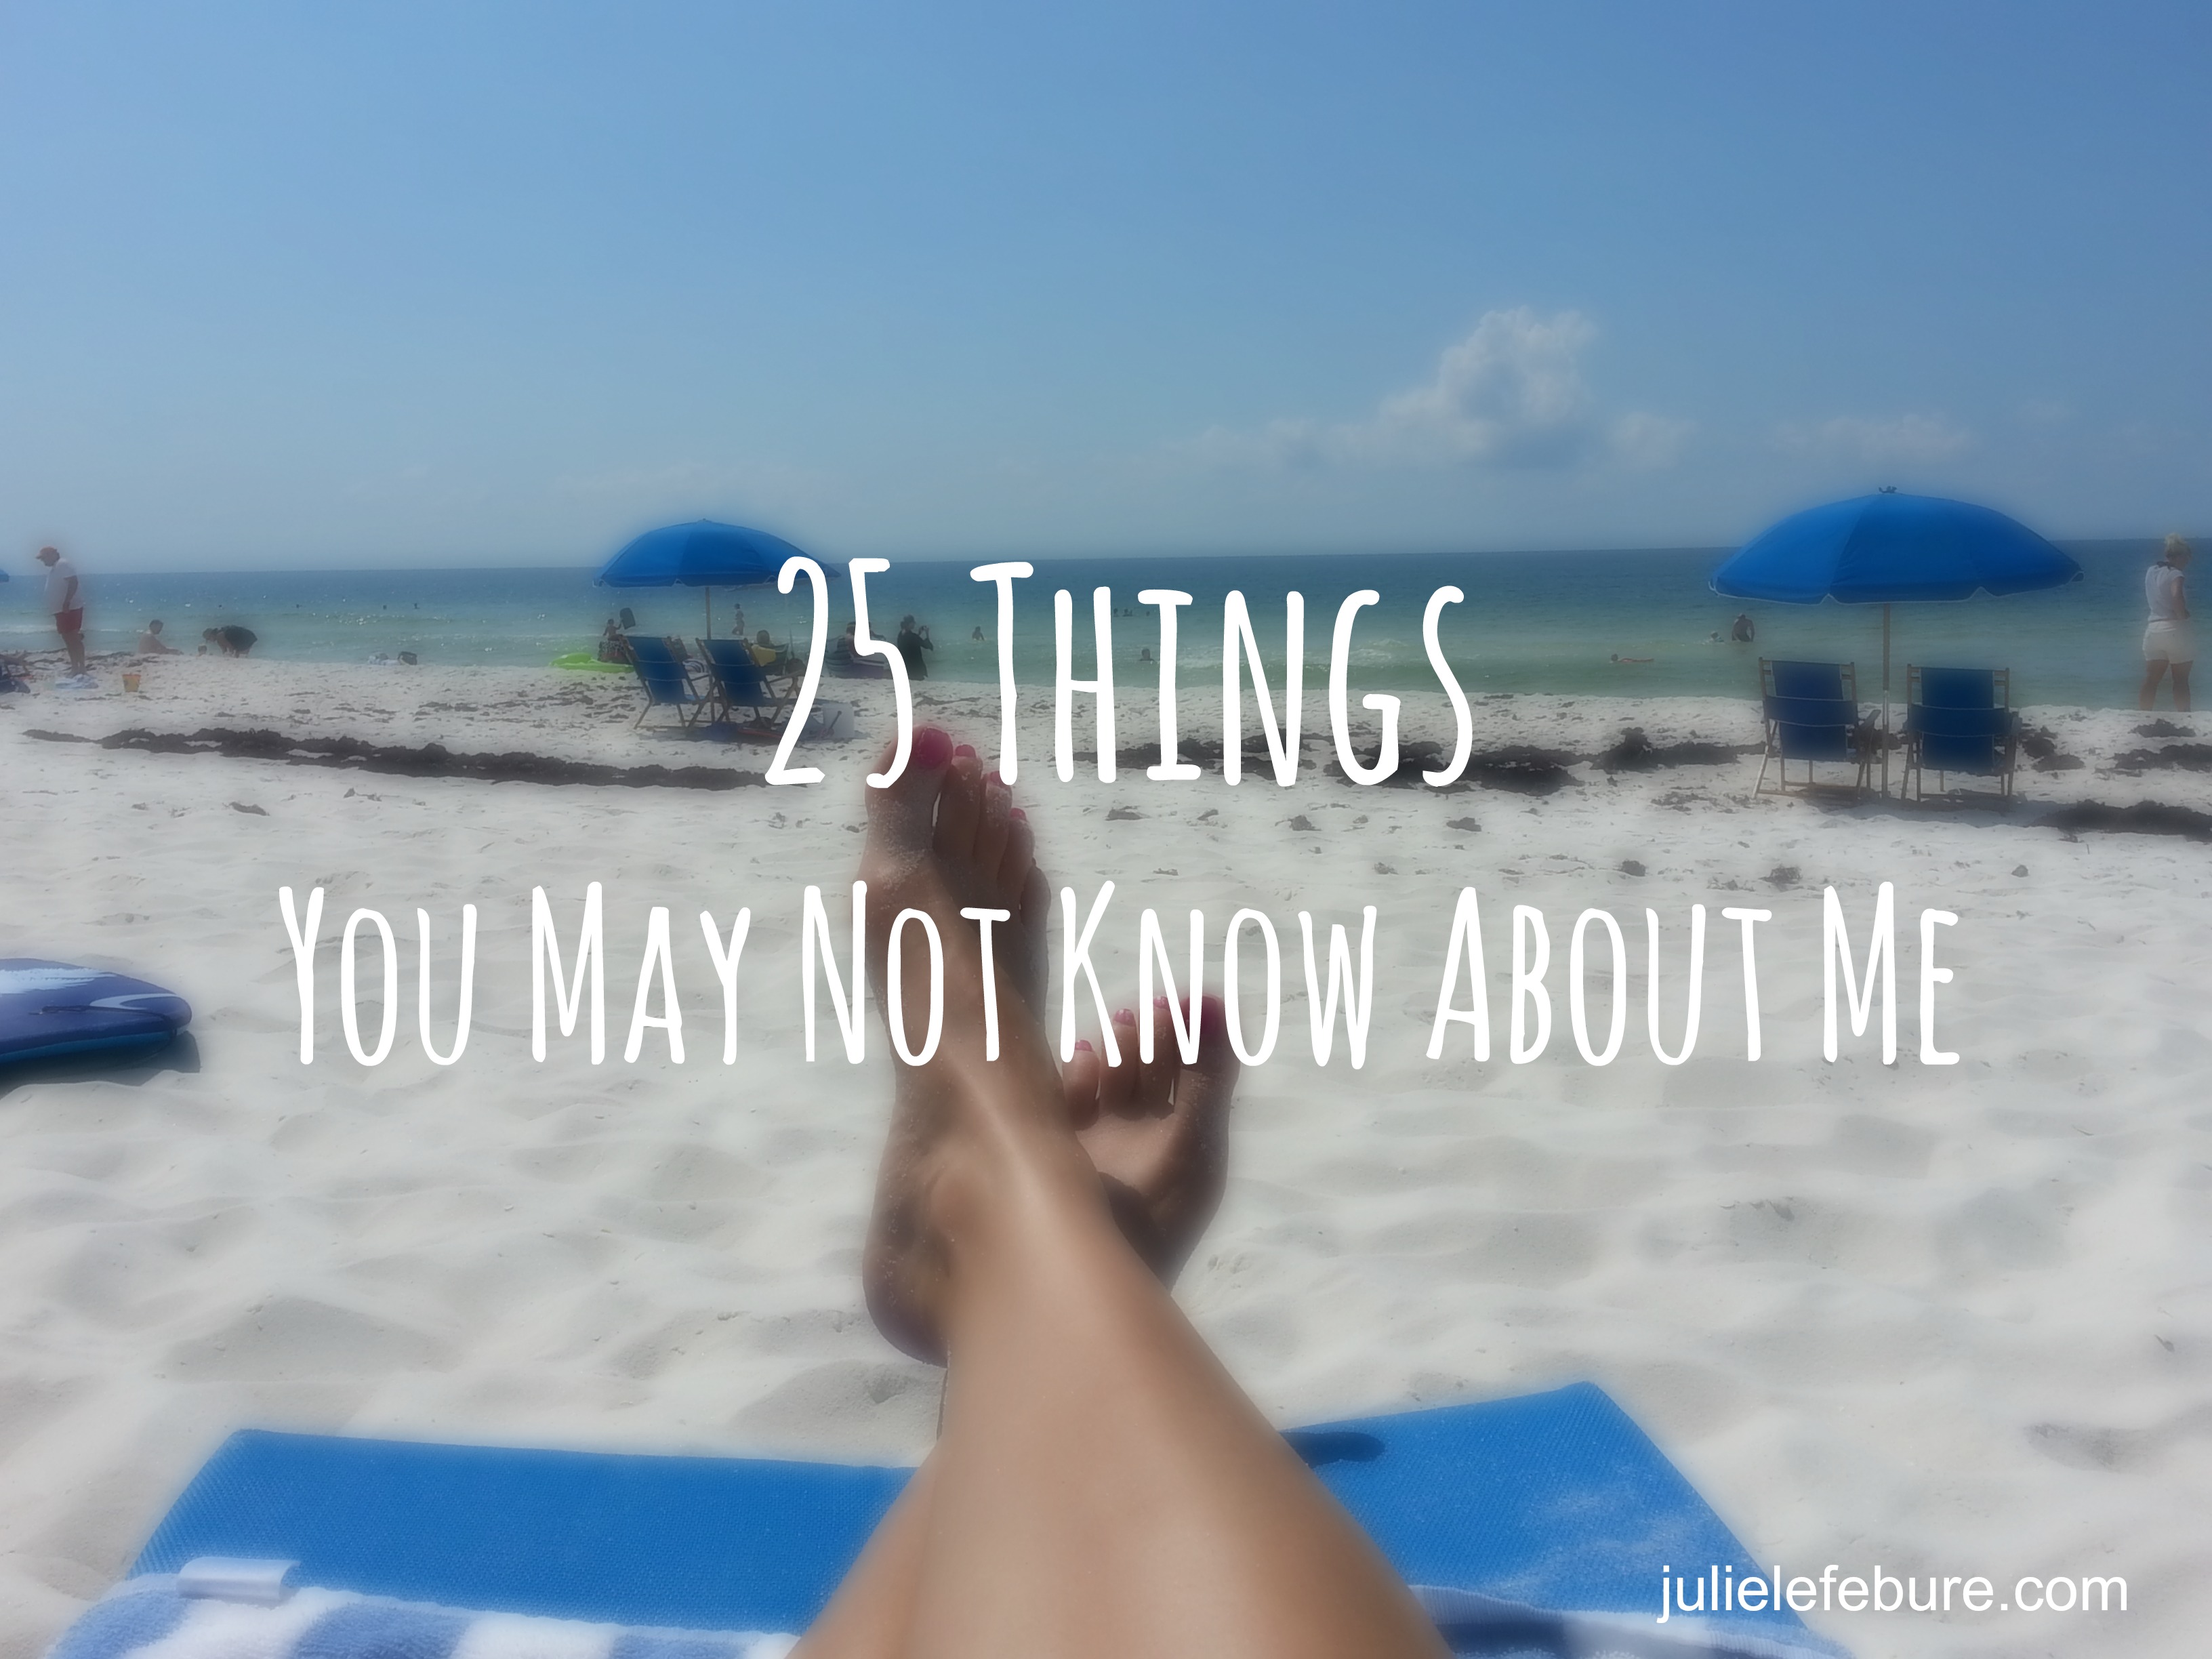 25 Things You May Not Know About Me